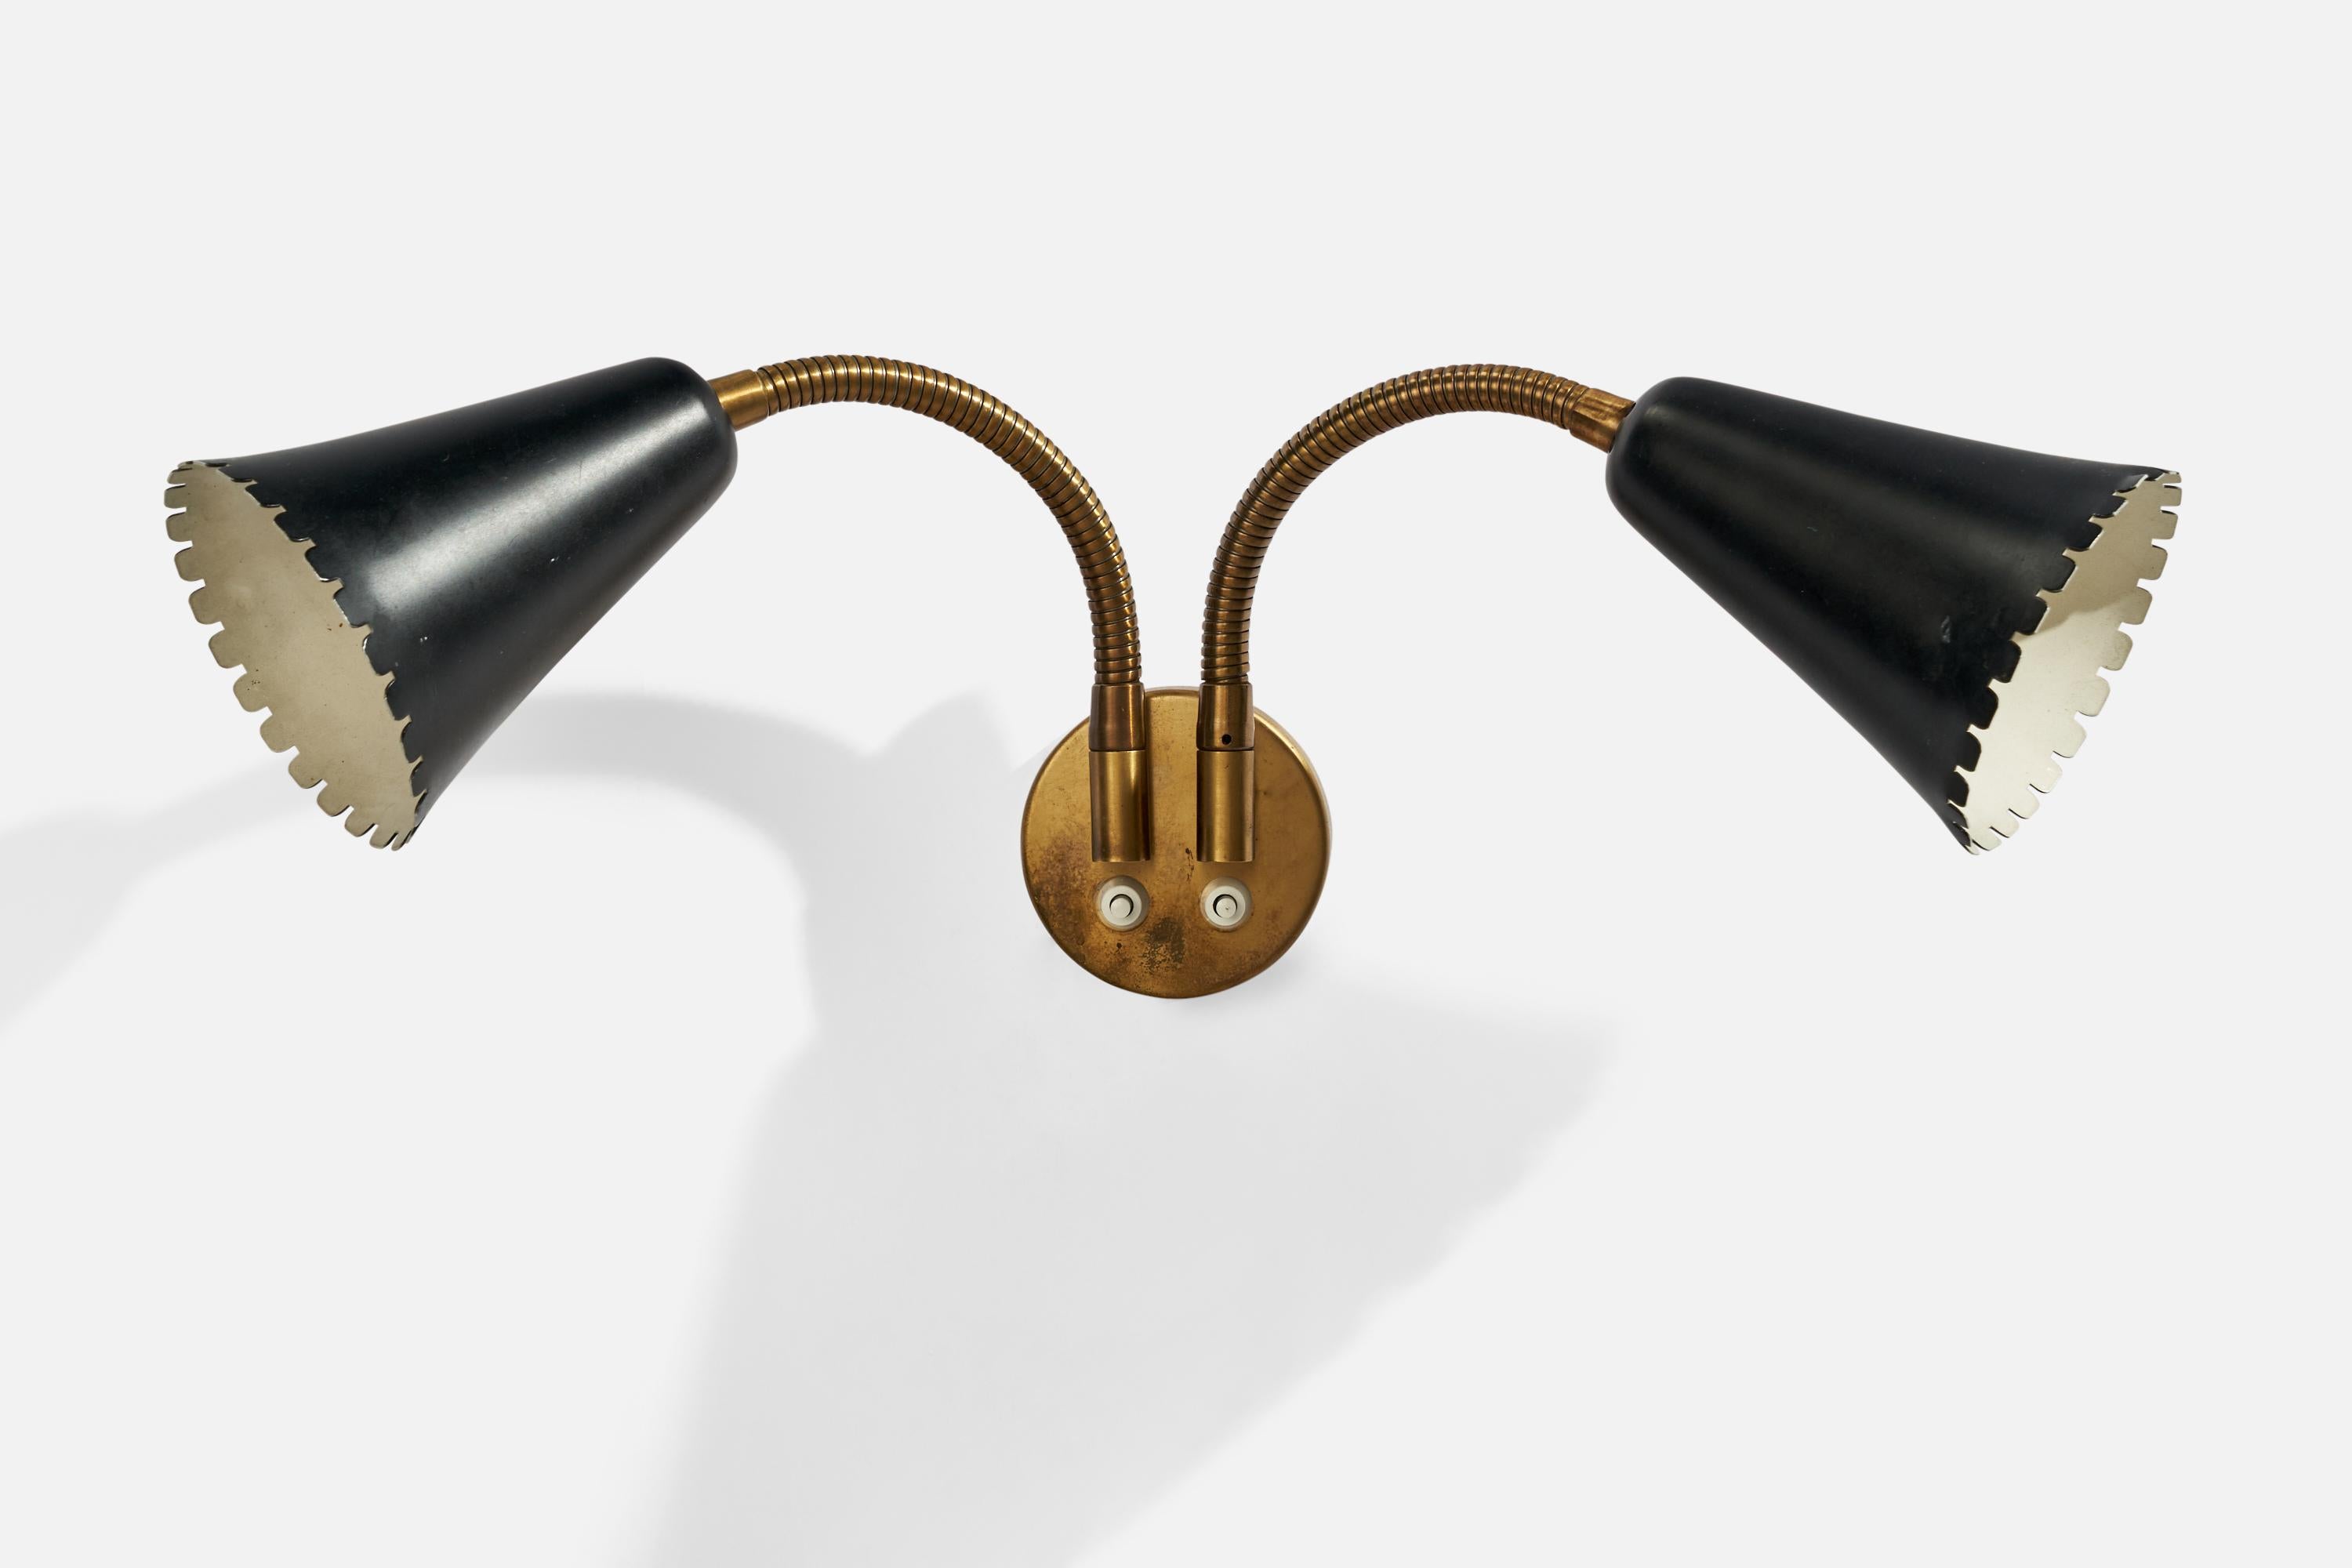 An adjustable two-armed brass and black-lacquered metal wall light designed and produced in Sweden, 1940s.

Dimensions variable 
Overall Dimensions (inches): 16” H x 12” W x 5.25” D
Back Plate Dimensions (inches): 3.5”  H x 3.5”  W x .75” D
Bulb